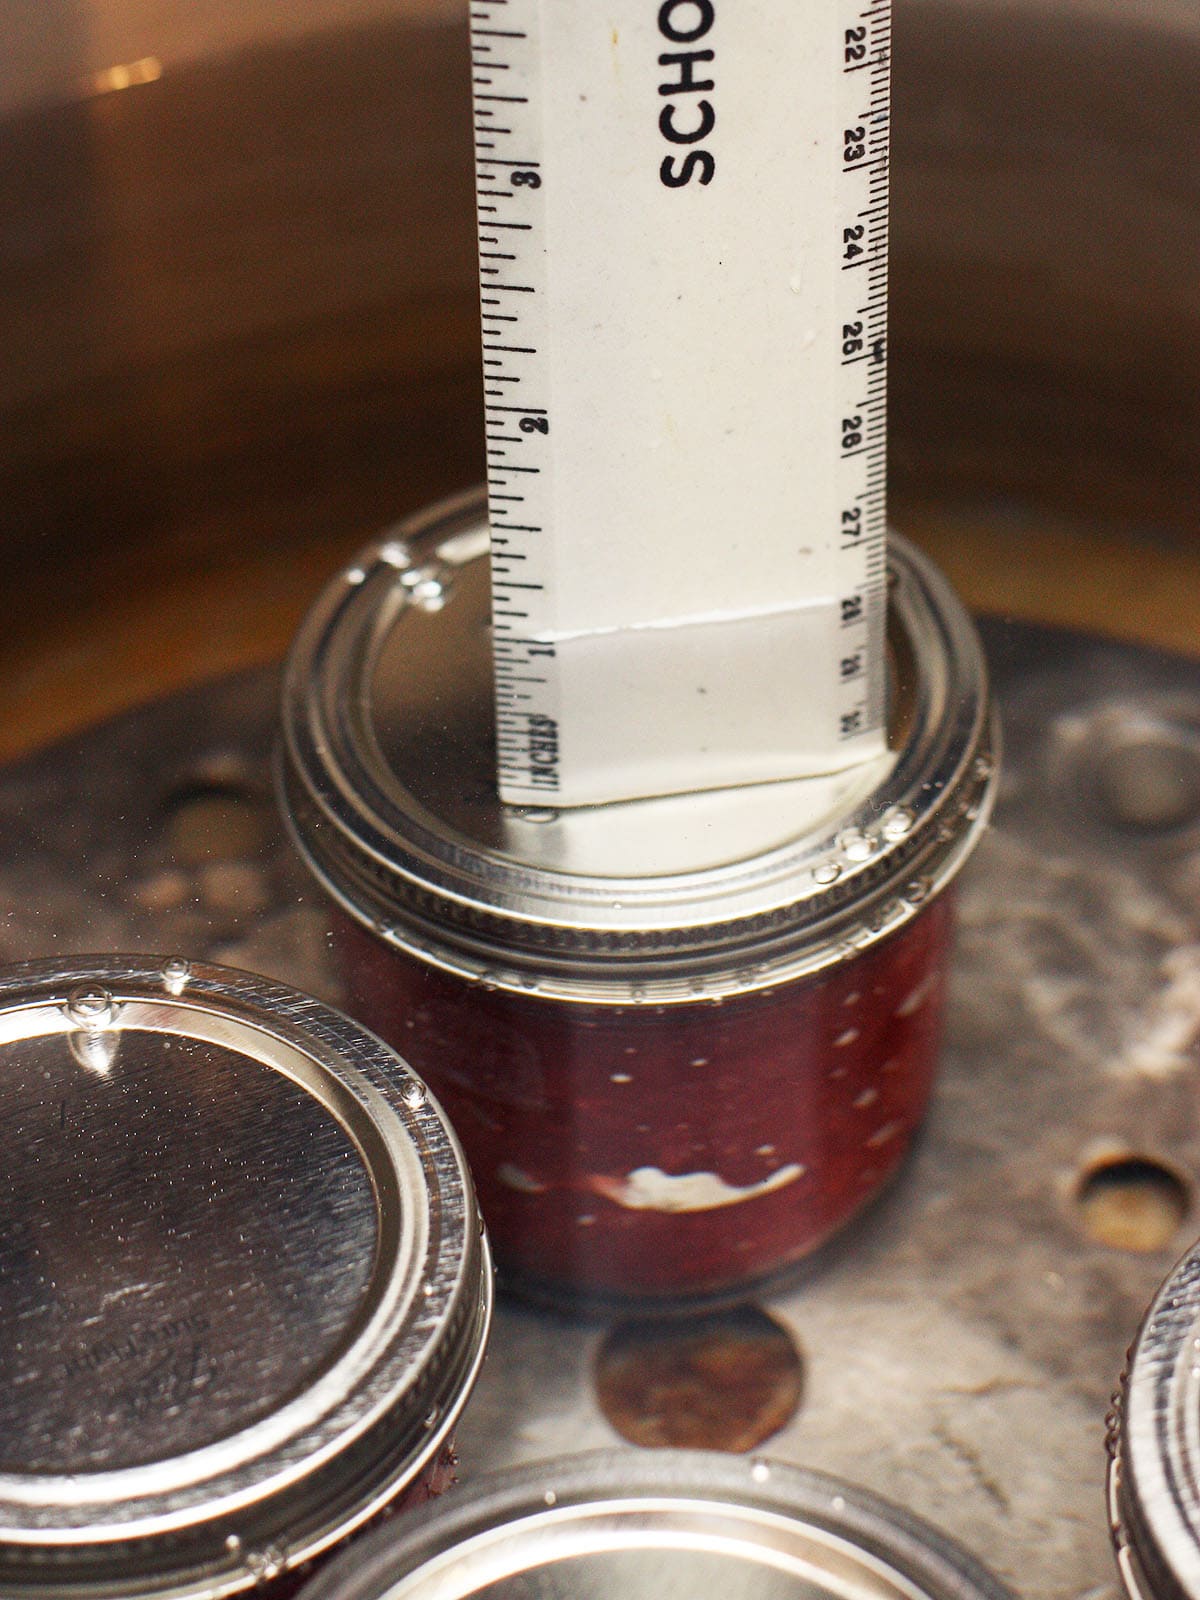 ruler showing the water level over the tops of the jars